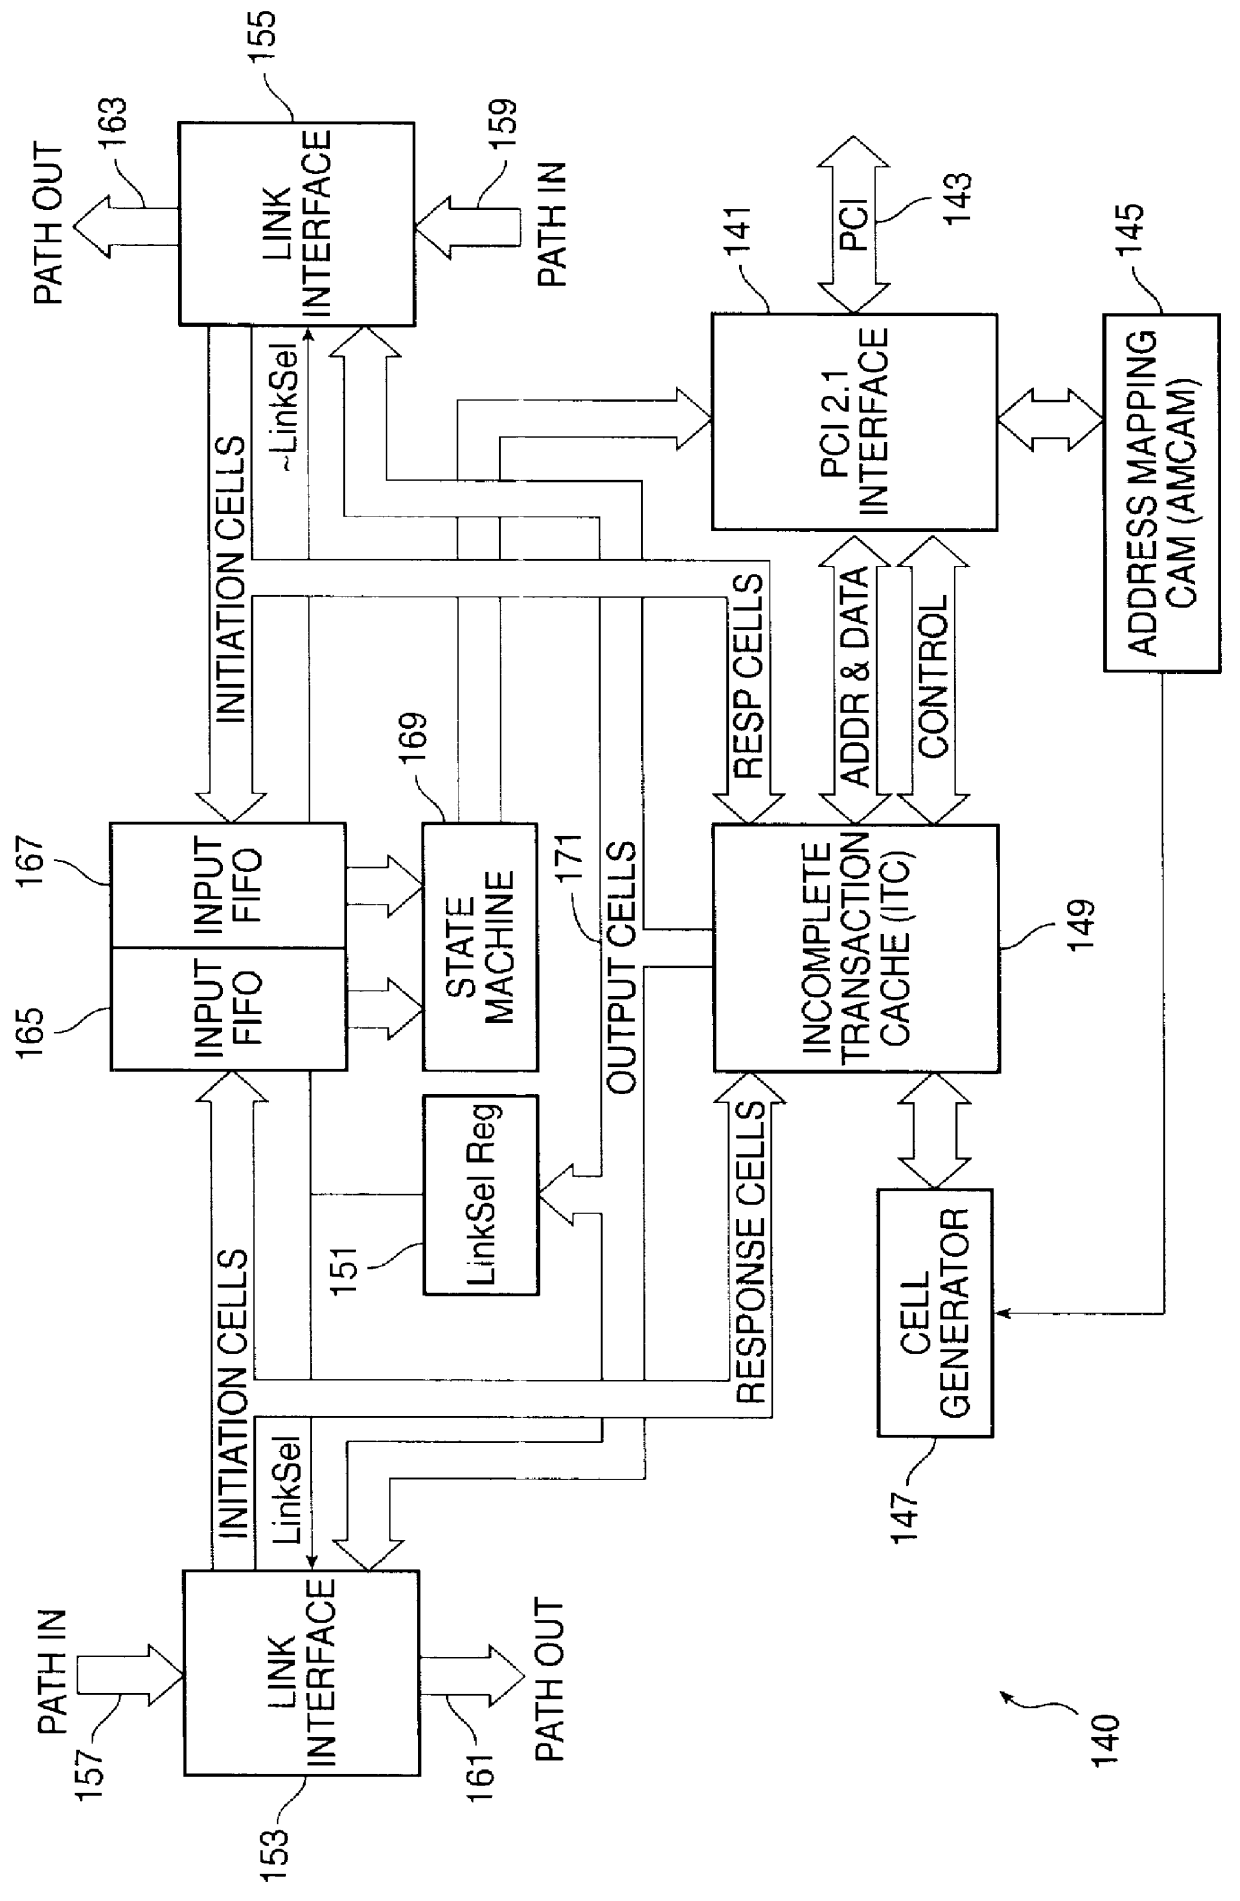 Method and apparatus for a fault tolerant, software transparent and high data integrity extension to a backplane bus or interconnect